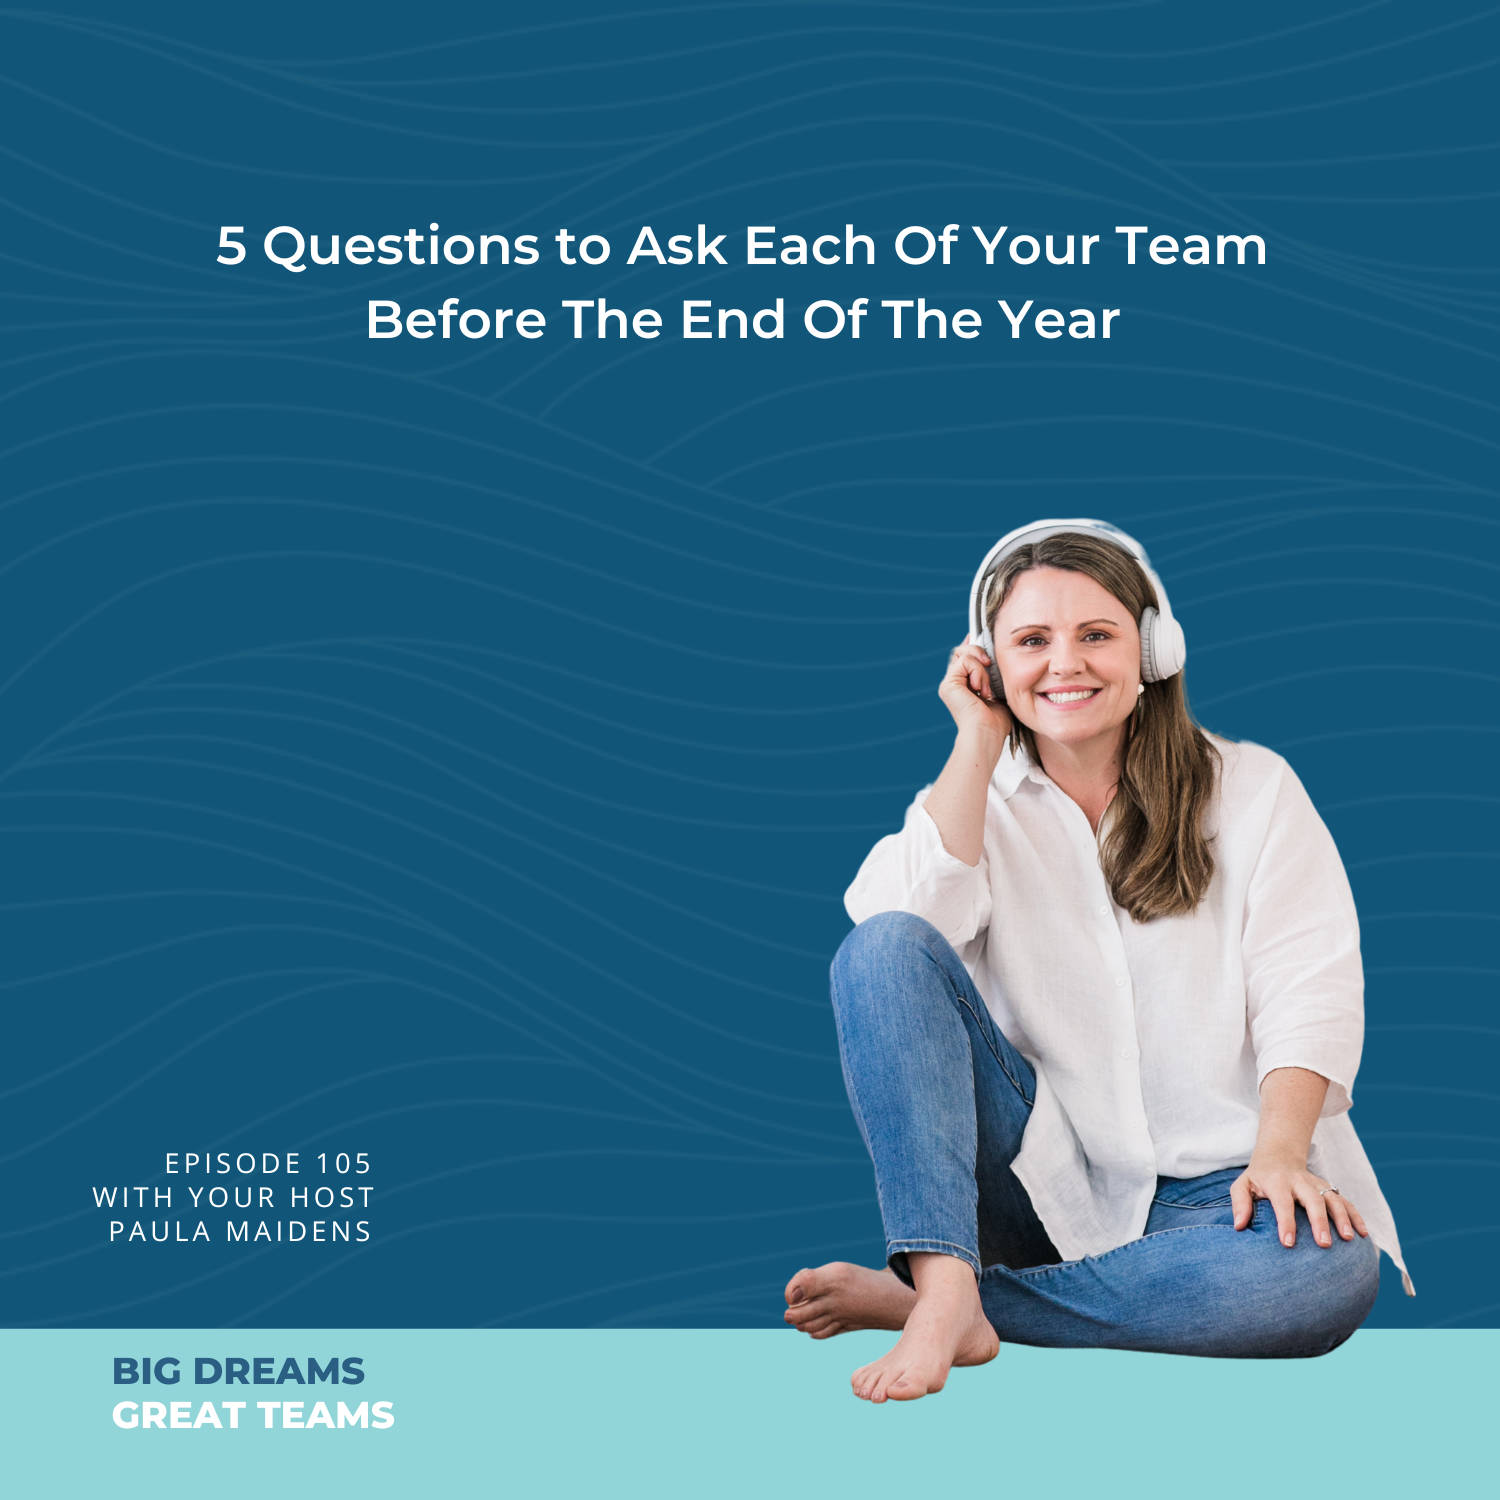 Episode #105 - 5 Questions to Ask Each Of Your Team Before The End Of The Year